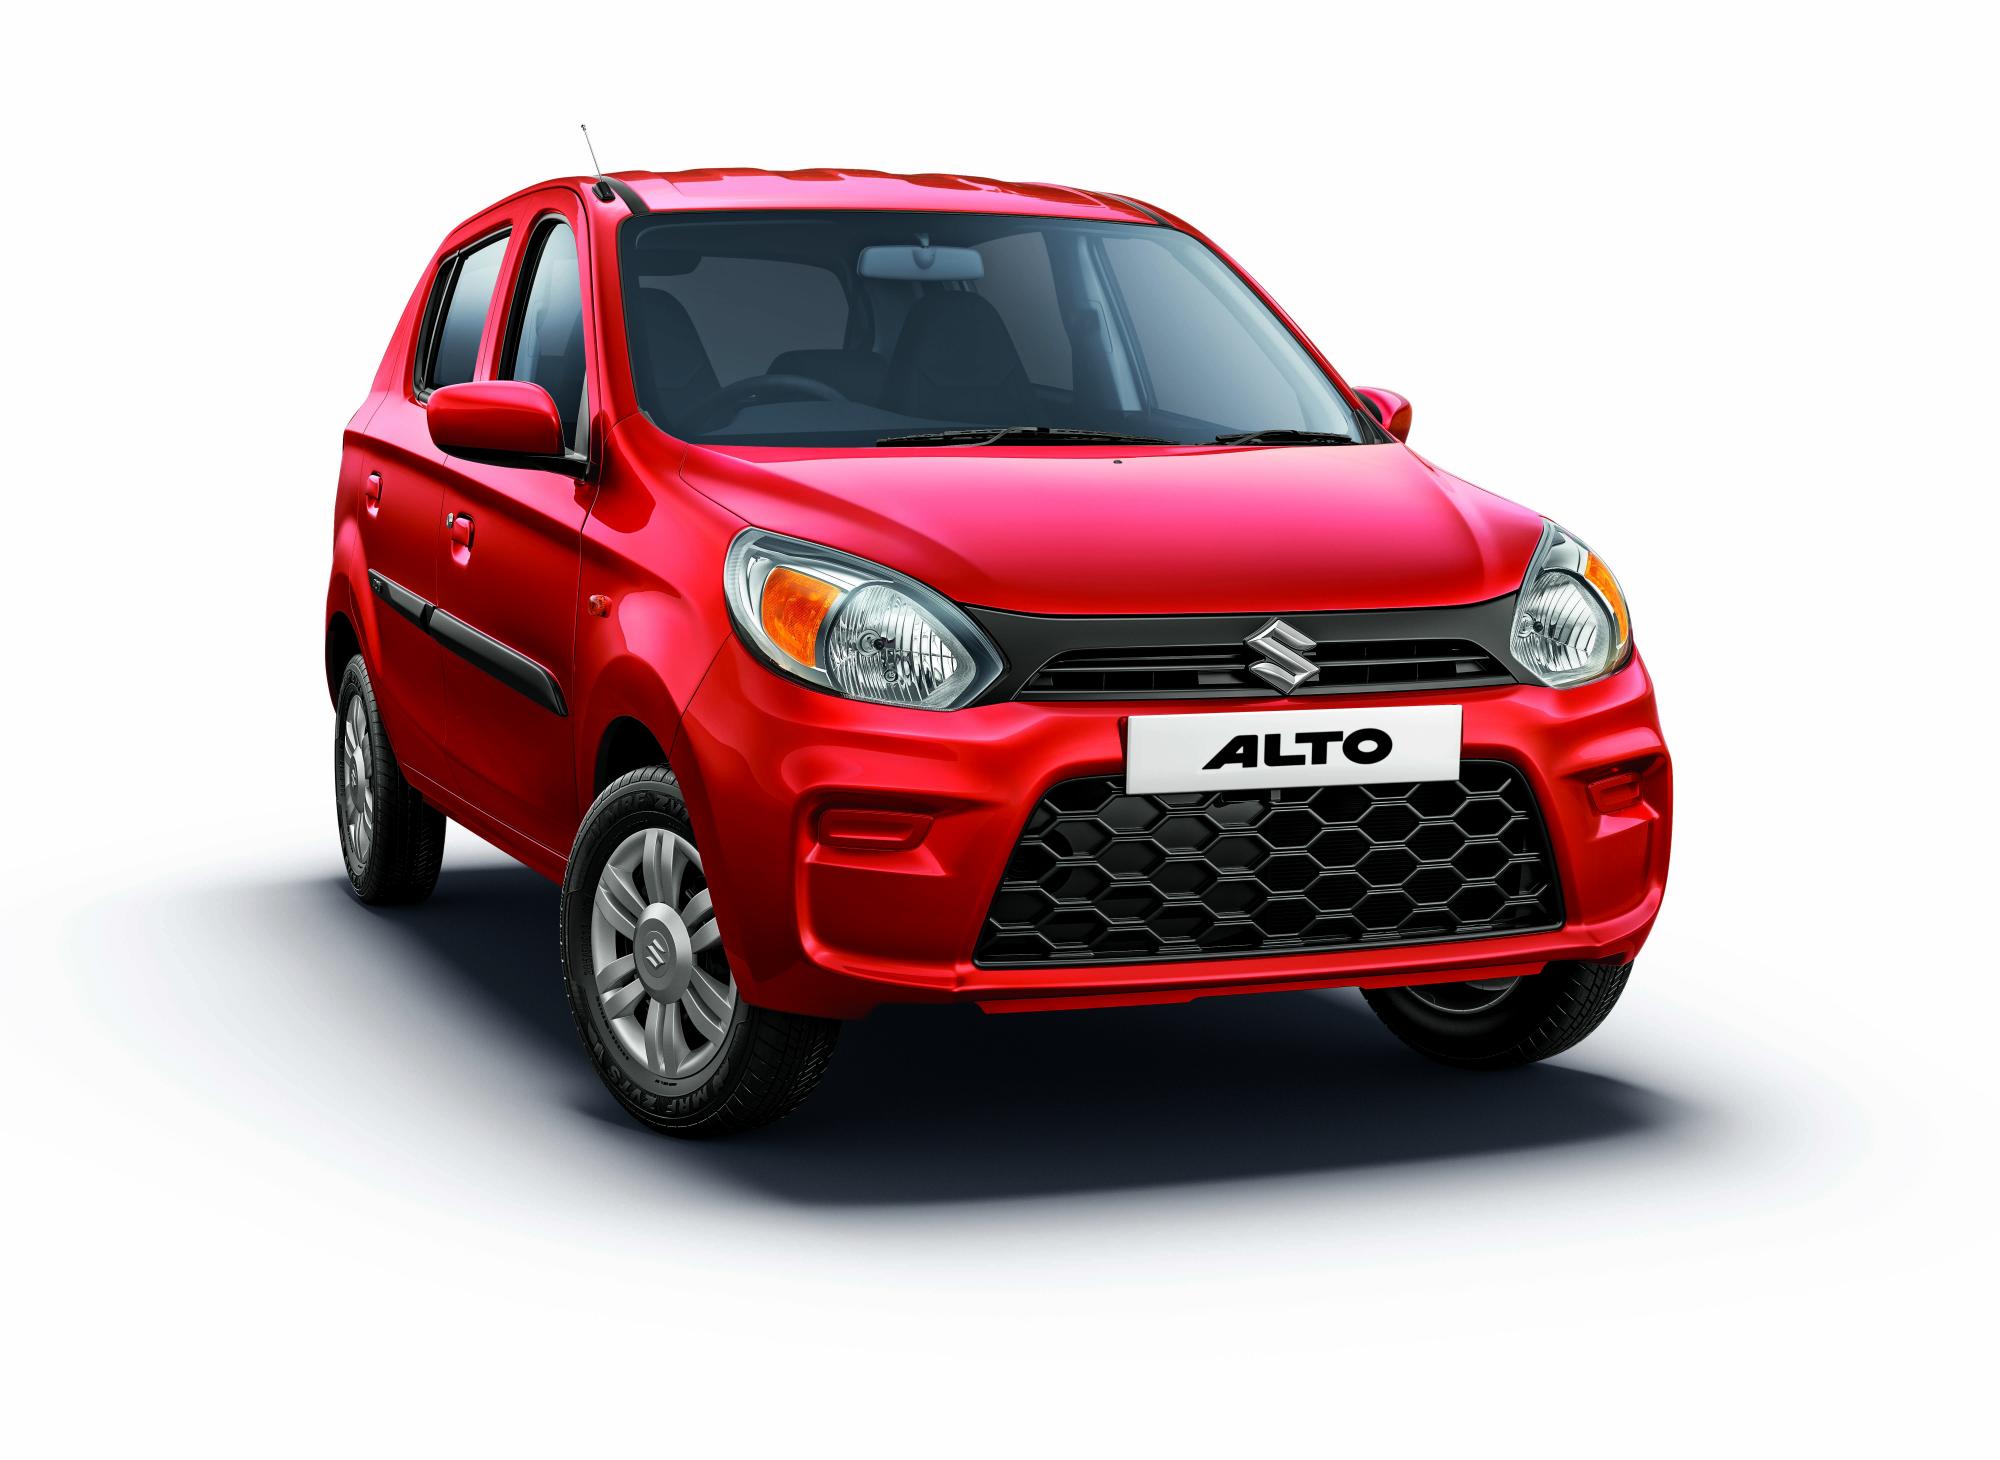 Bs Vi 2019 Maruti Suzuki Alto 800 Launched Priced From Inr 2 94 Lakh